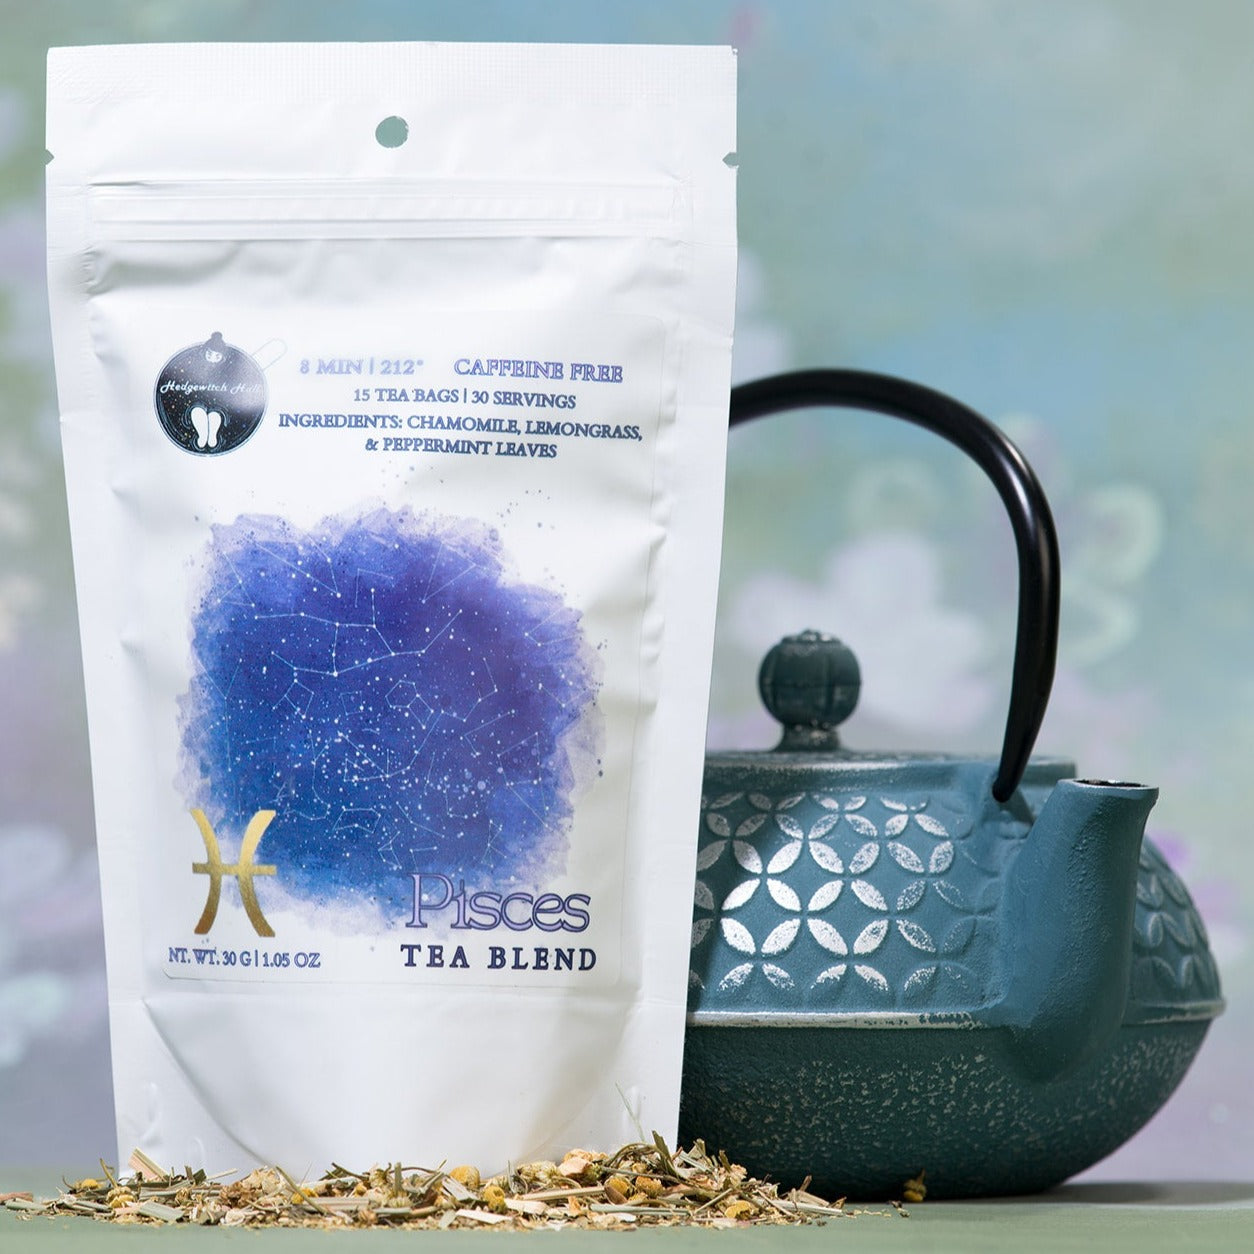 Product photo of Pisces tea blend and teal teapot.